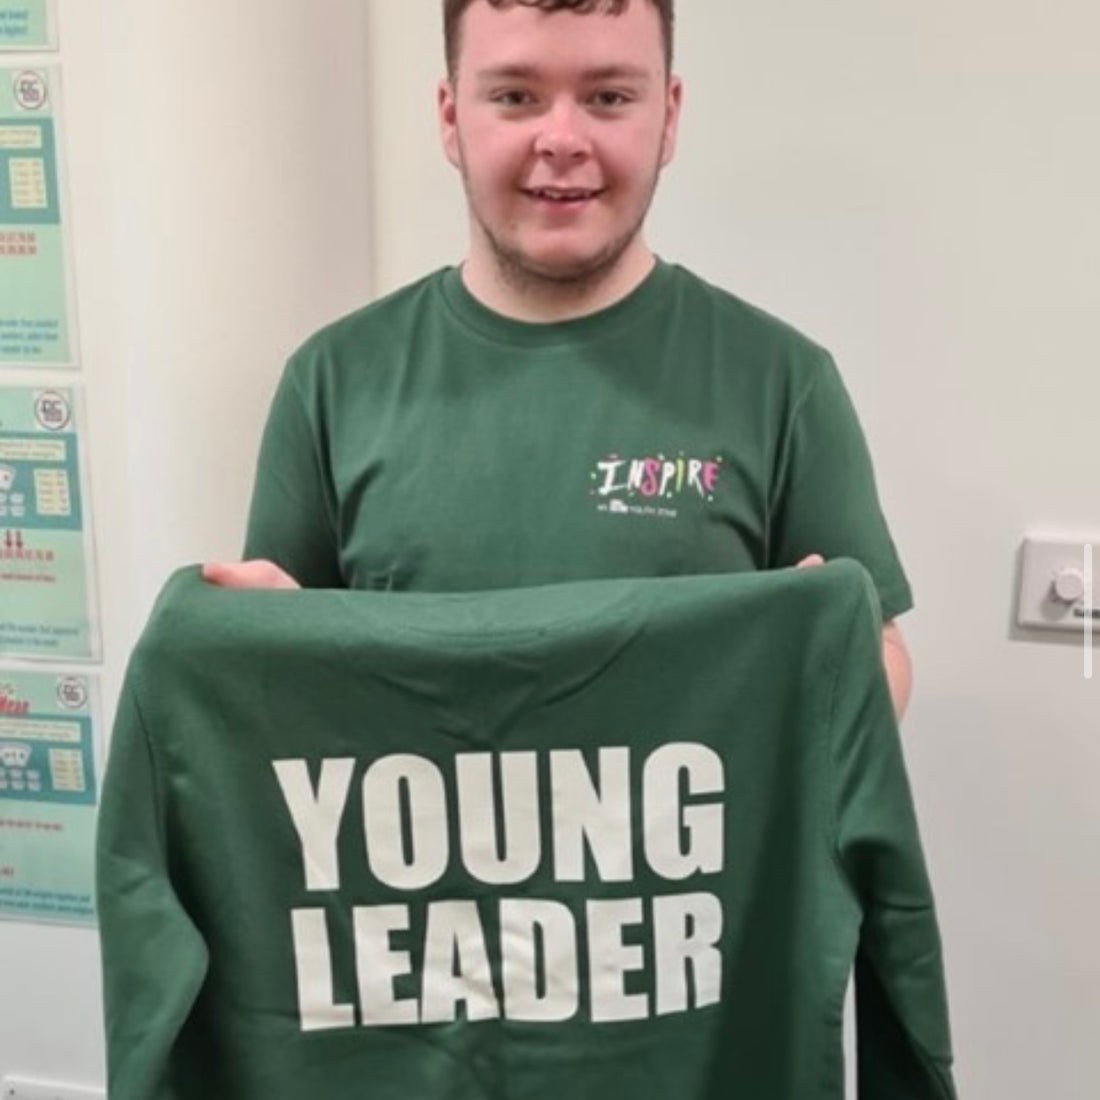 Inspire Young Leader uniforms